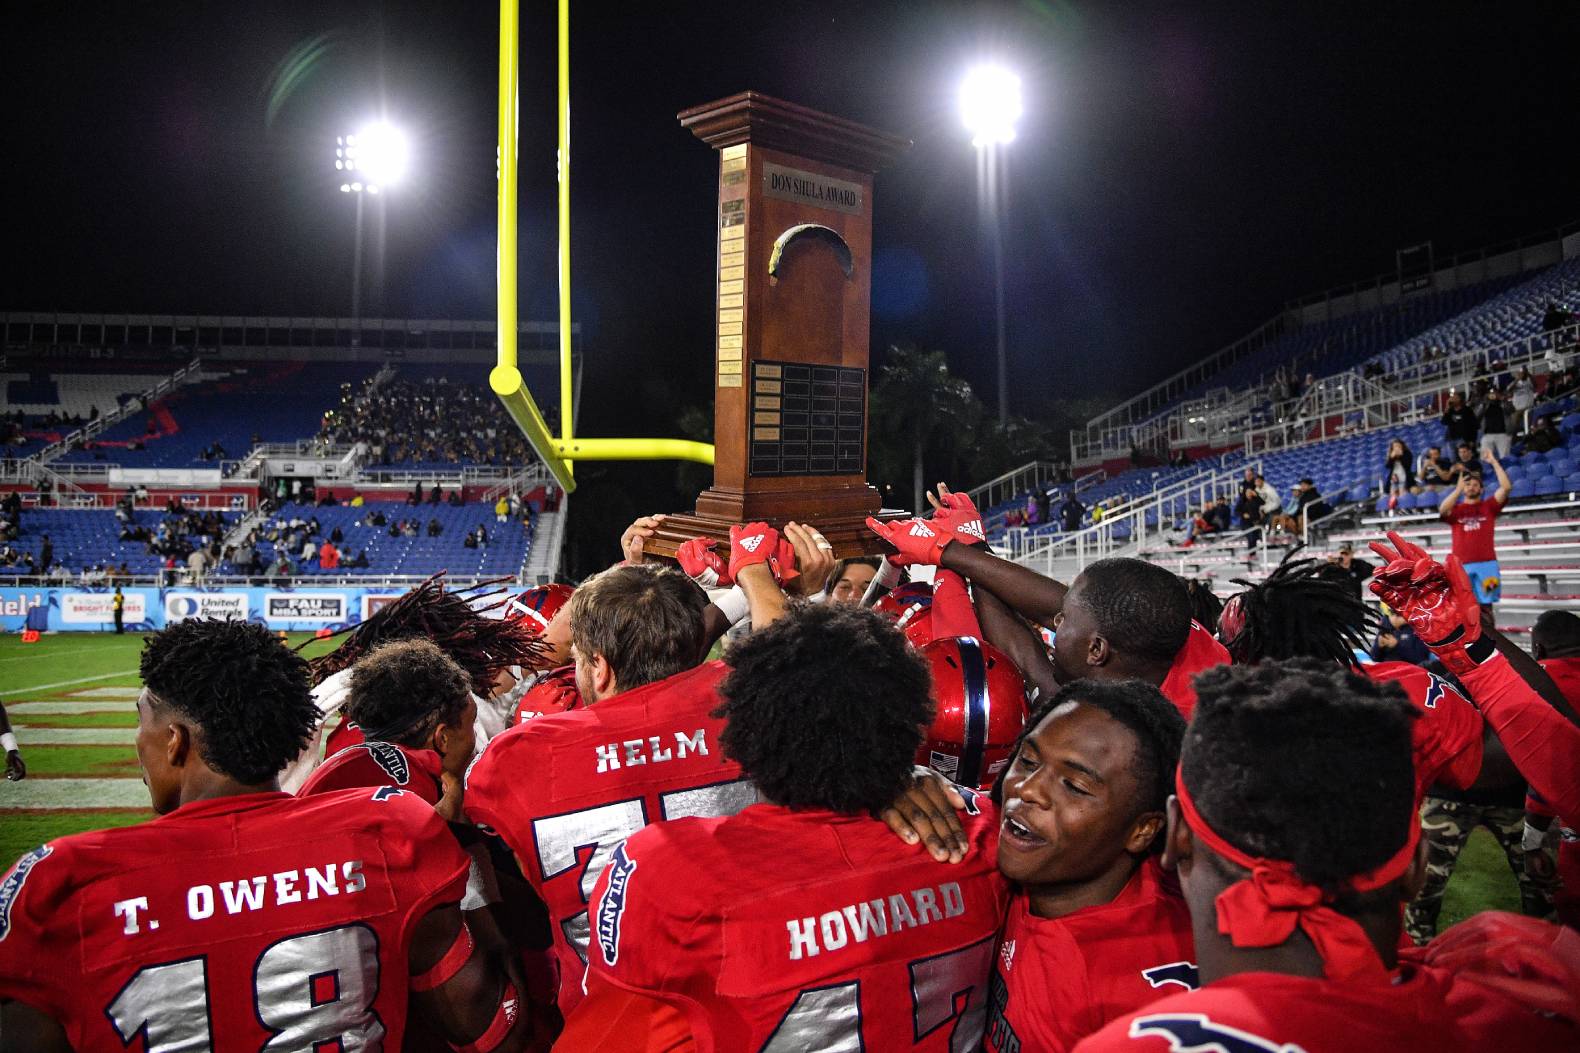 Florida Atlantic's football team didn't have a positive coronavirus test in its first two weeks back under new coach Willie Taggart.